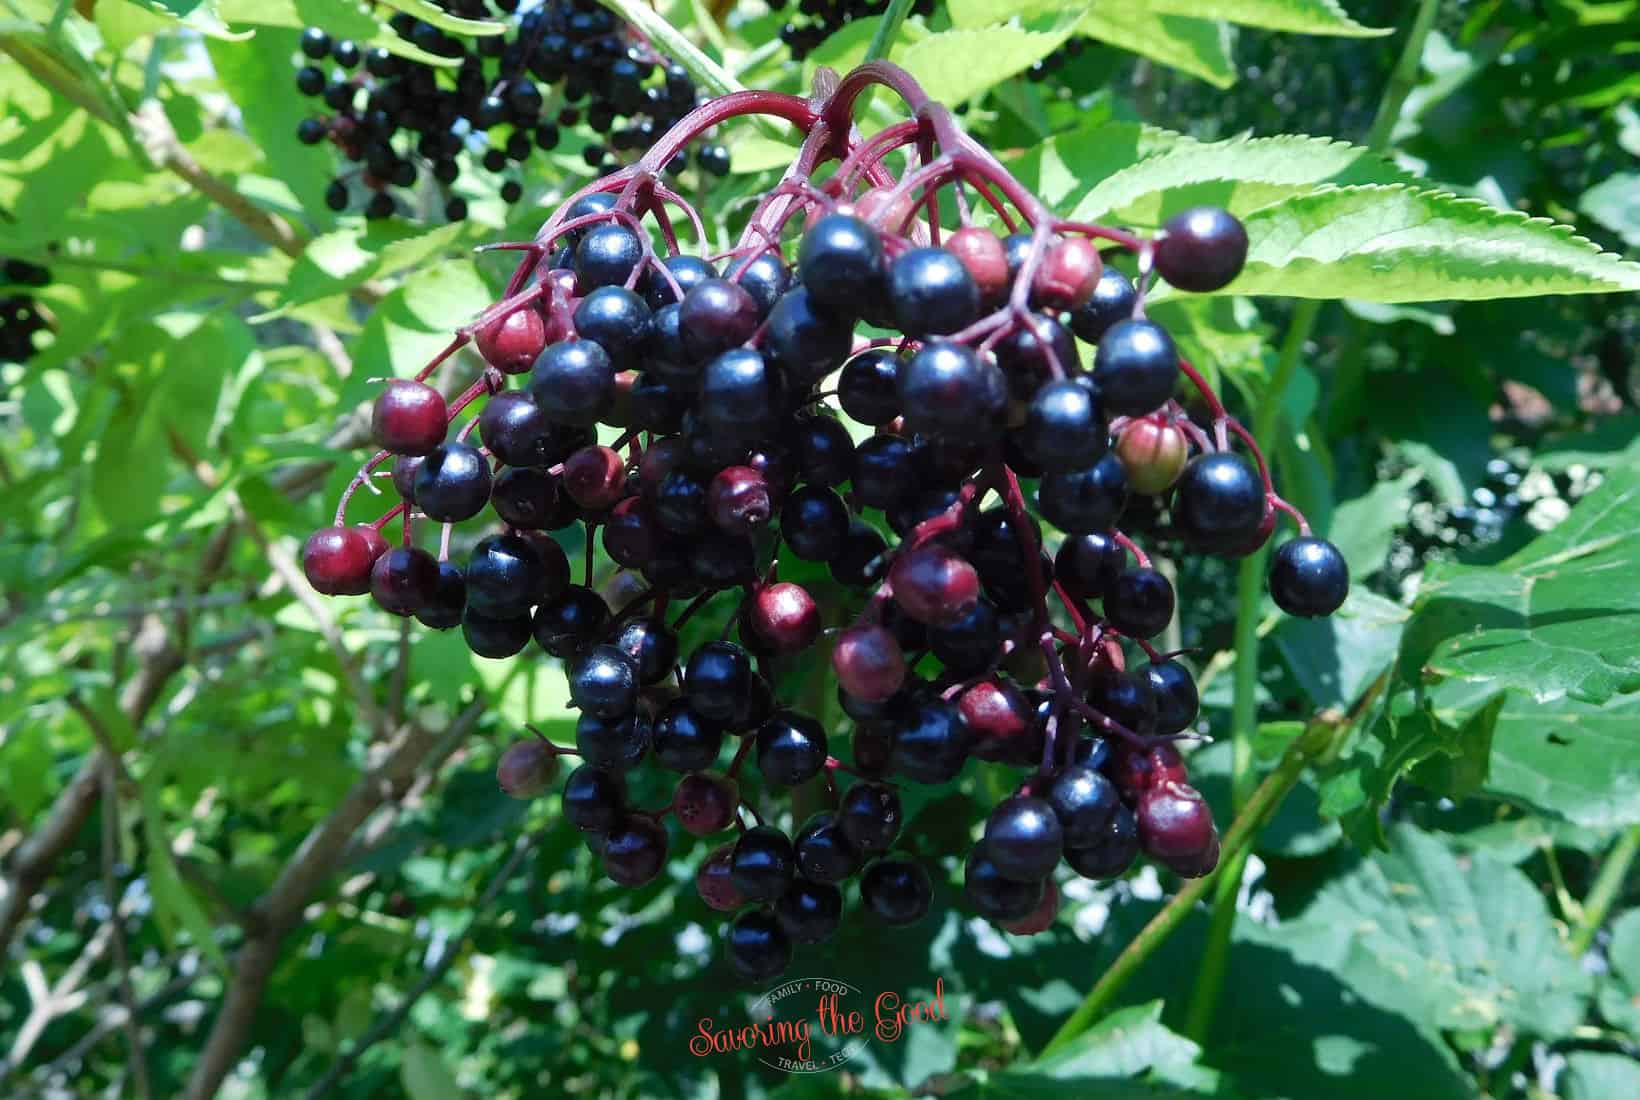 A bunch of black elderberries hanging from a tree.